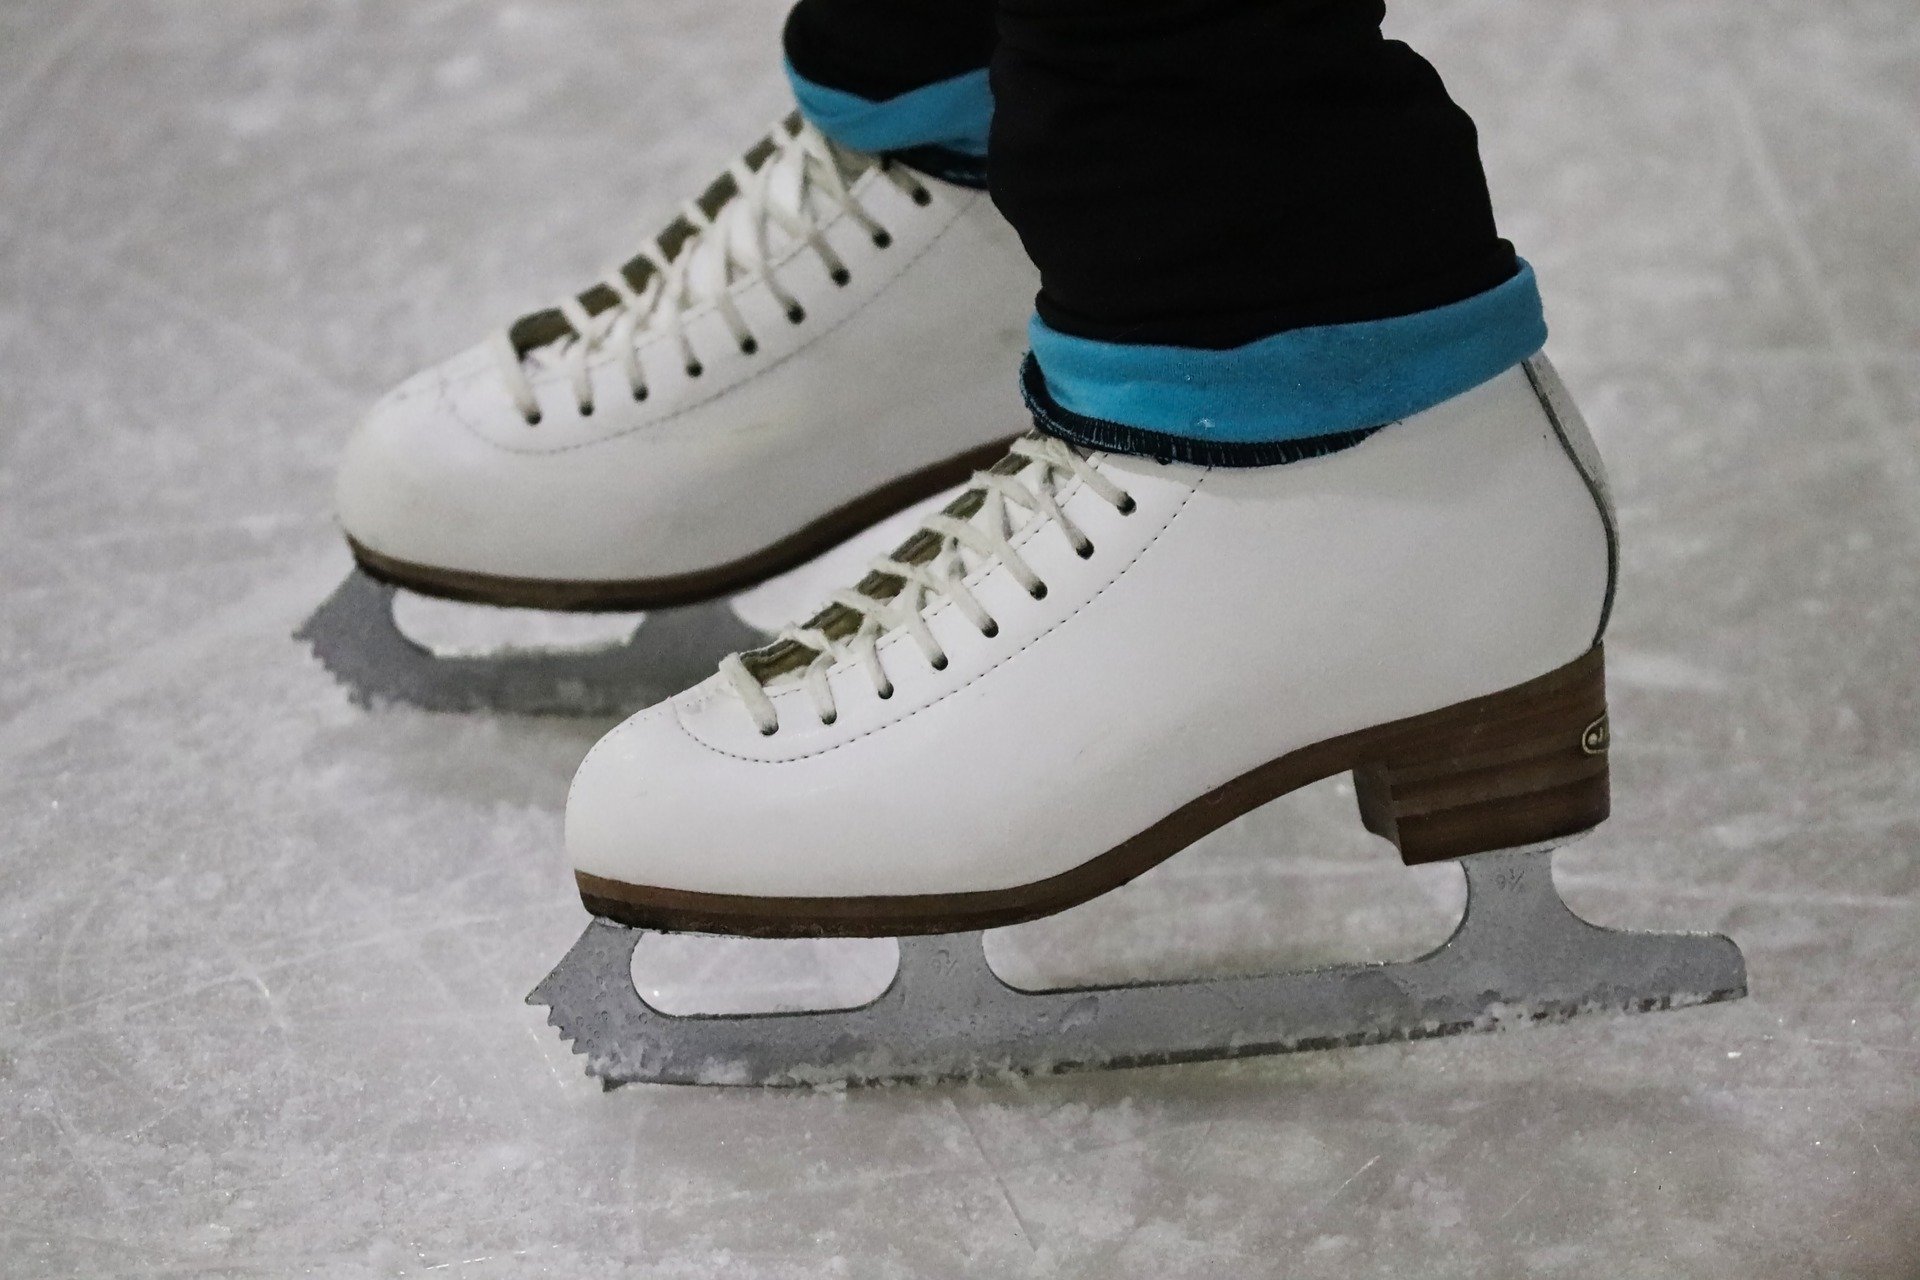 person wearing ice skating shoes